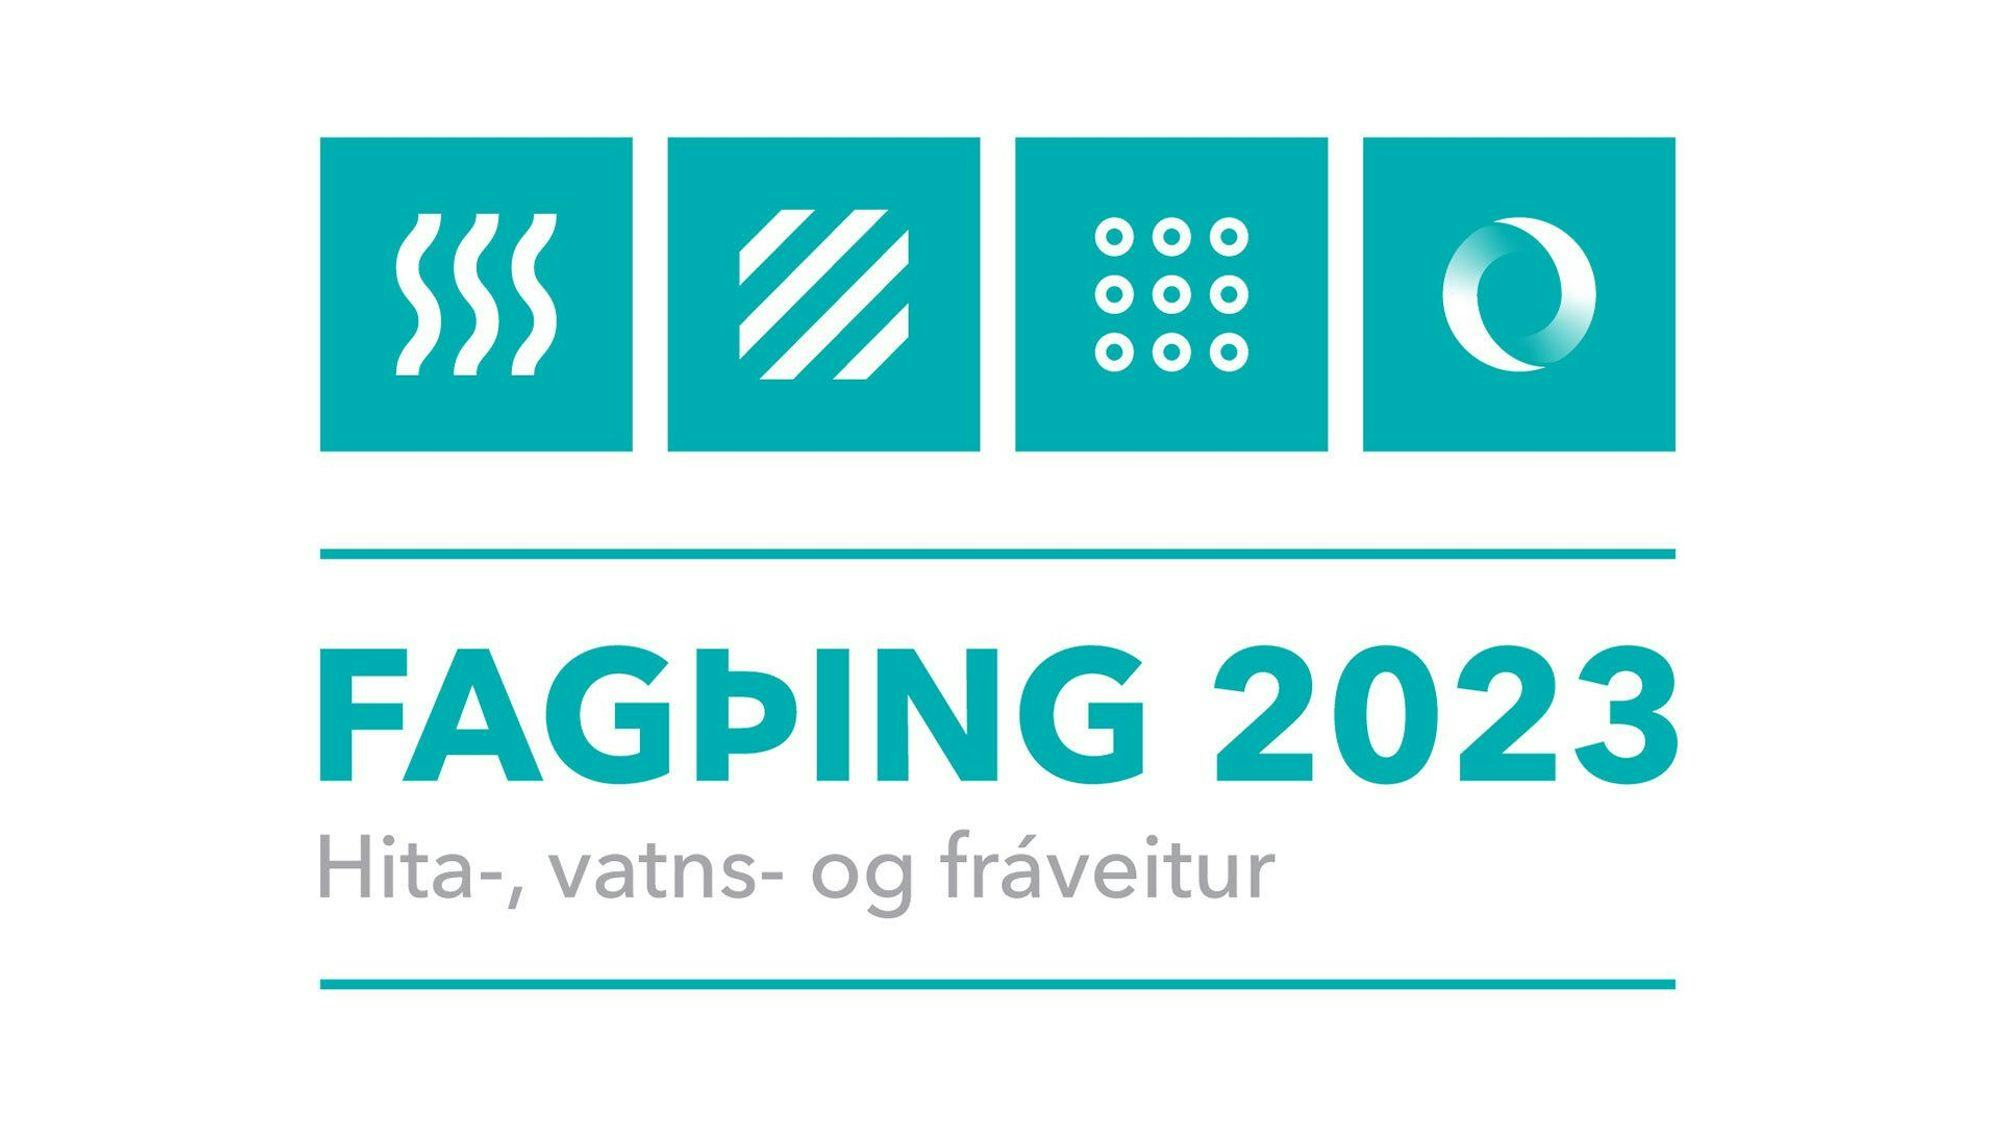 A logo with icon symbol in blue boxes with Icelandic texts 